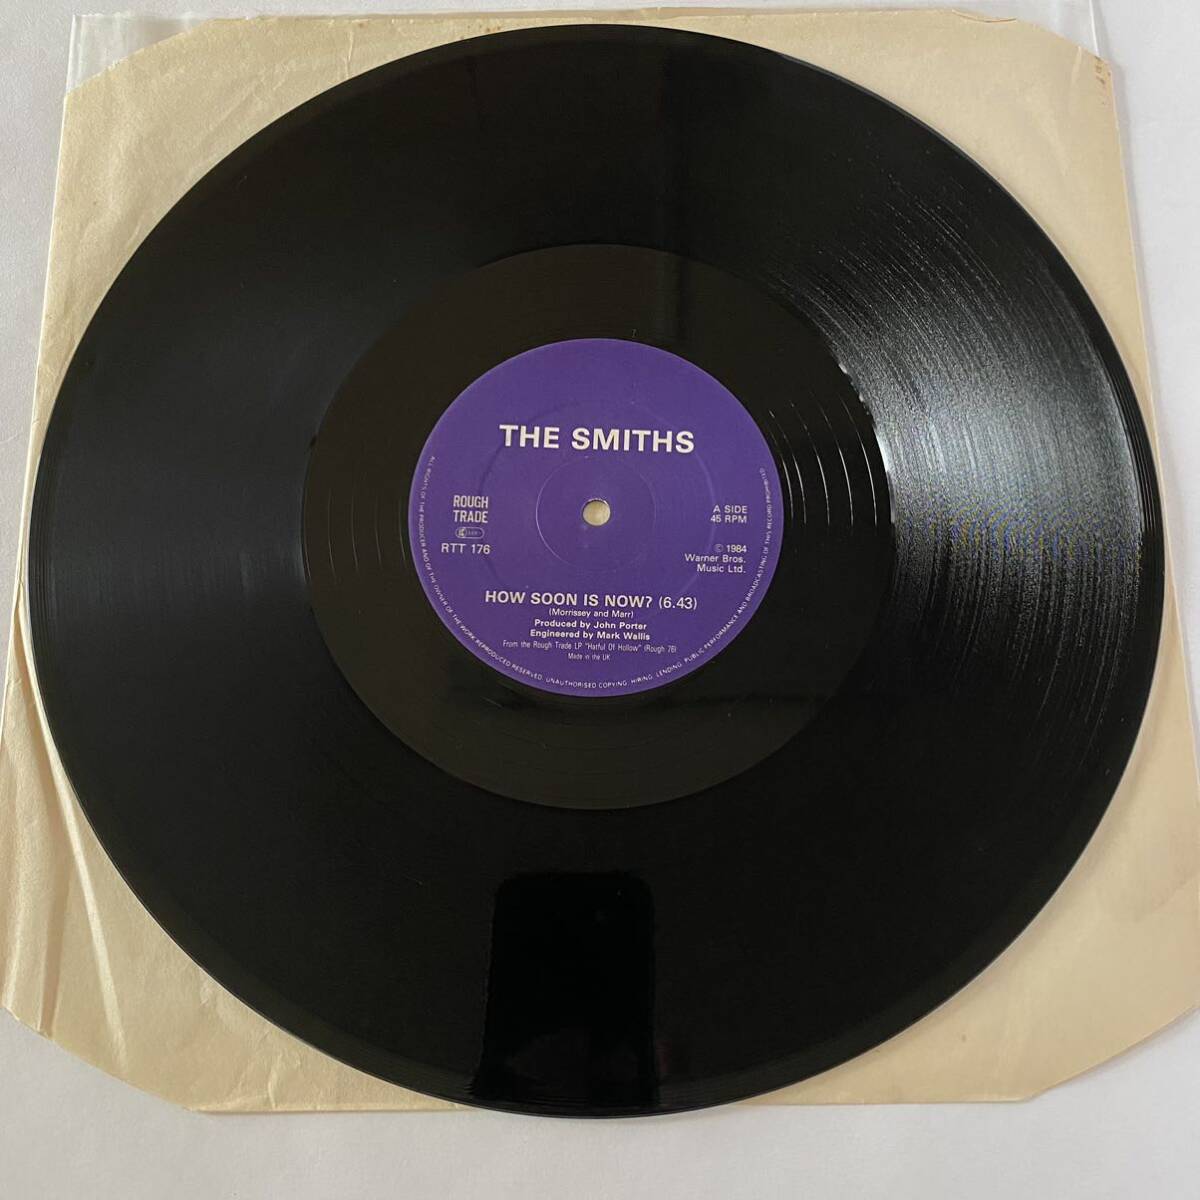 The Smiths / How Soon Is Now [12”] ‘85年 【UKオリジナル】 アルバム未収の名曲！ _画像3